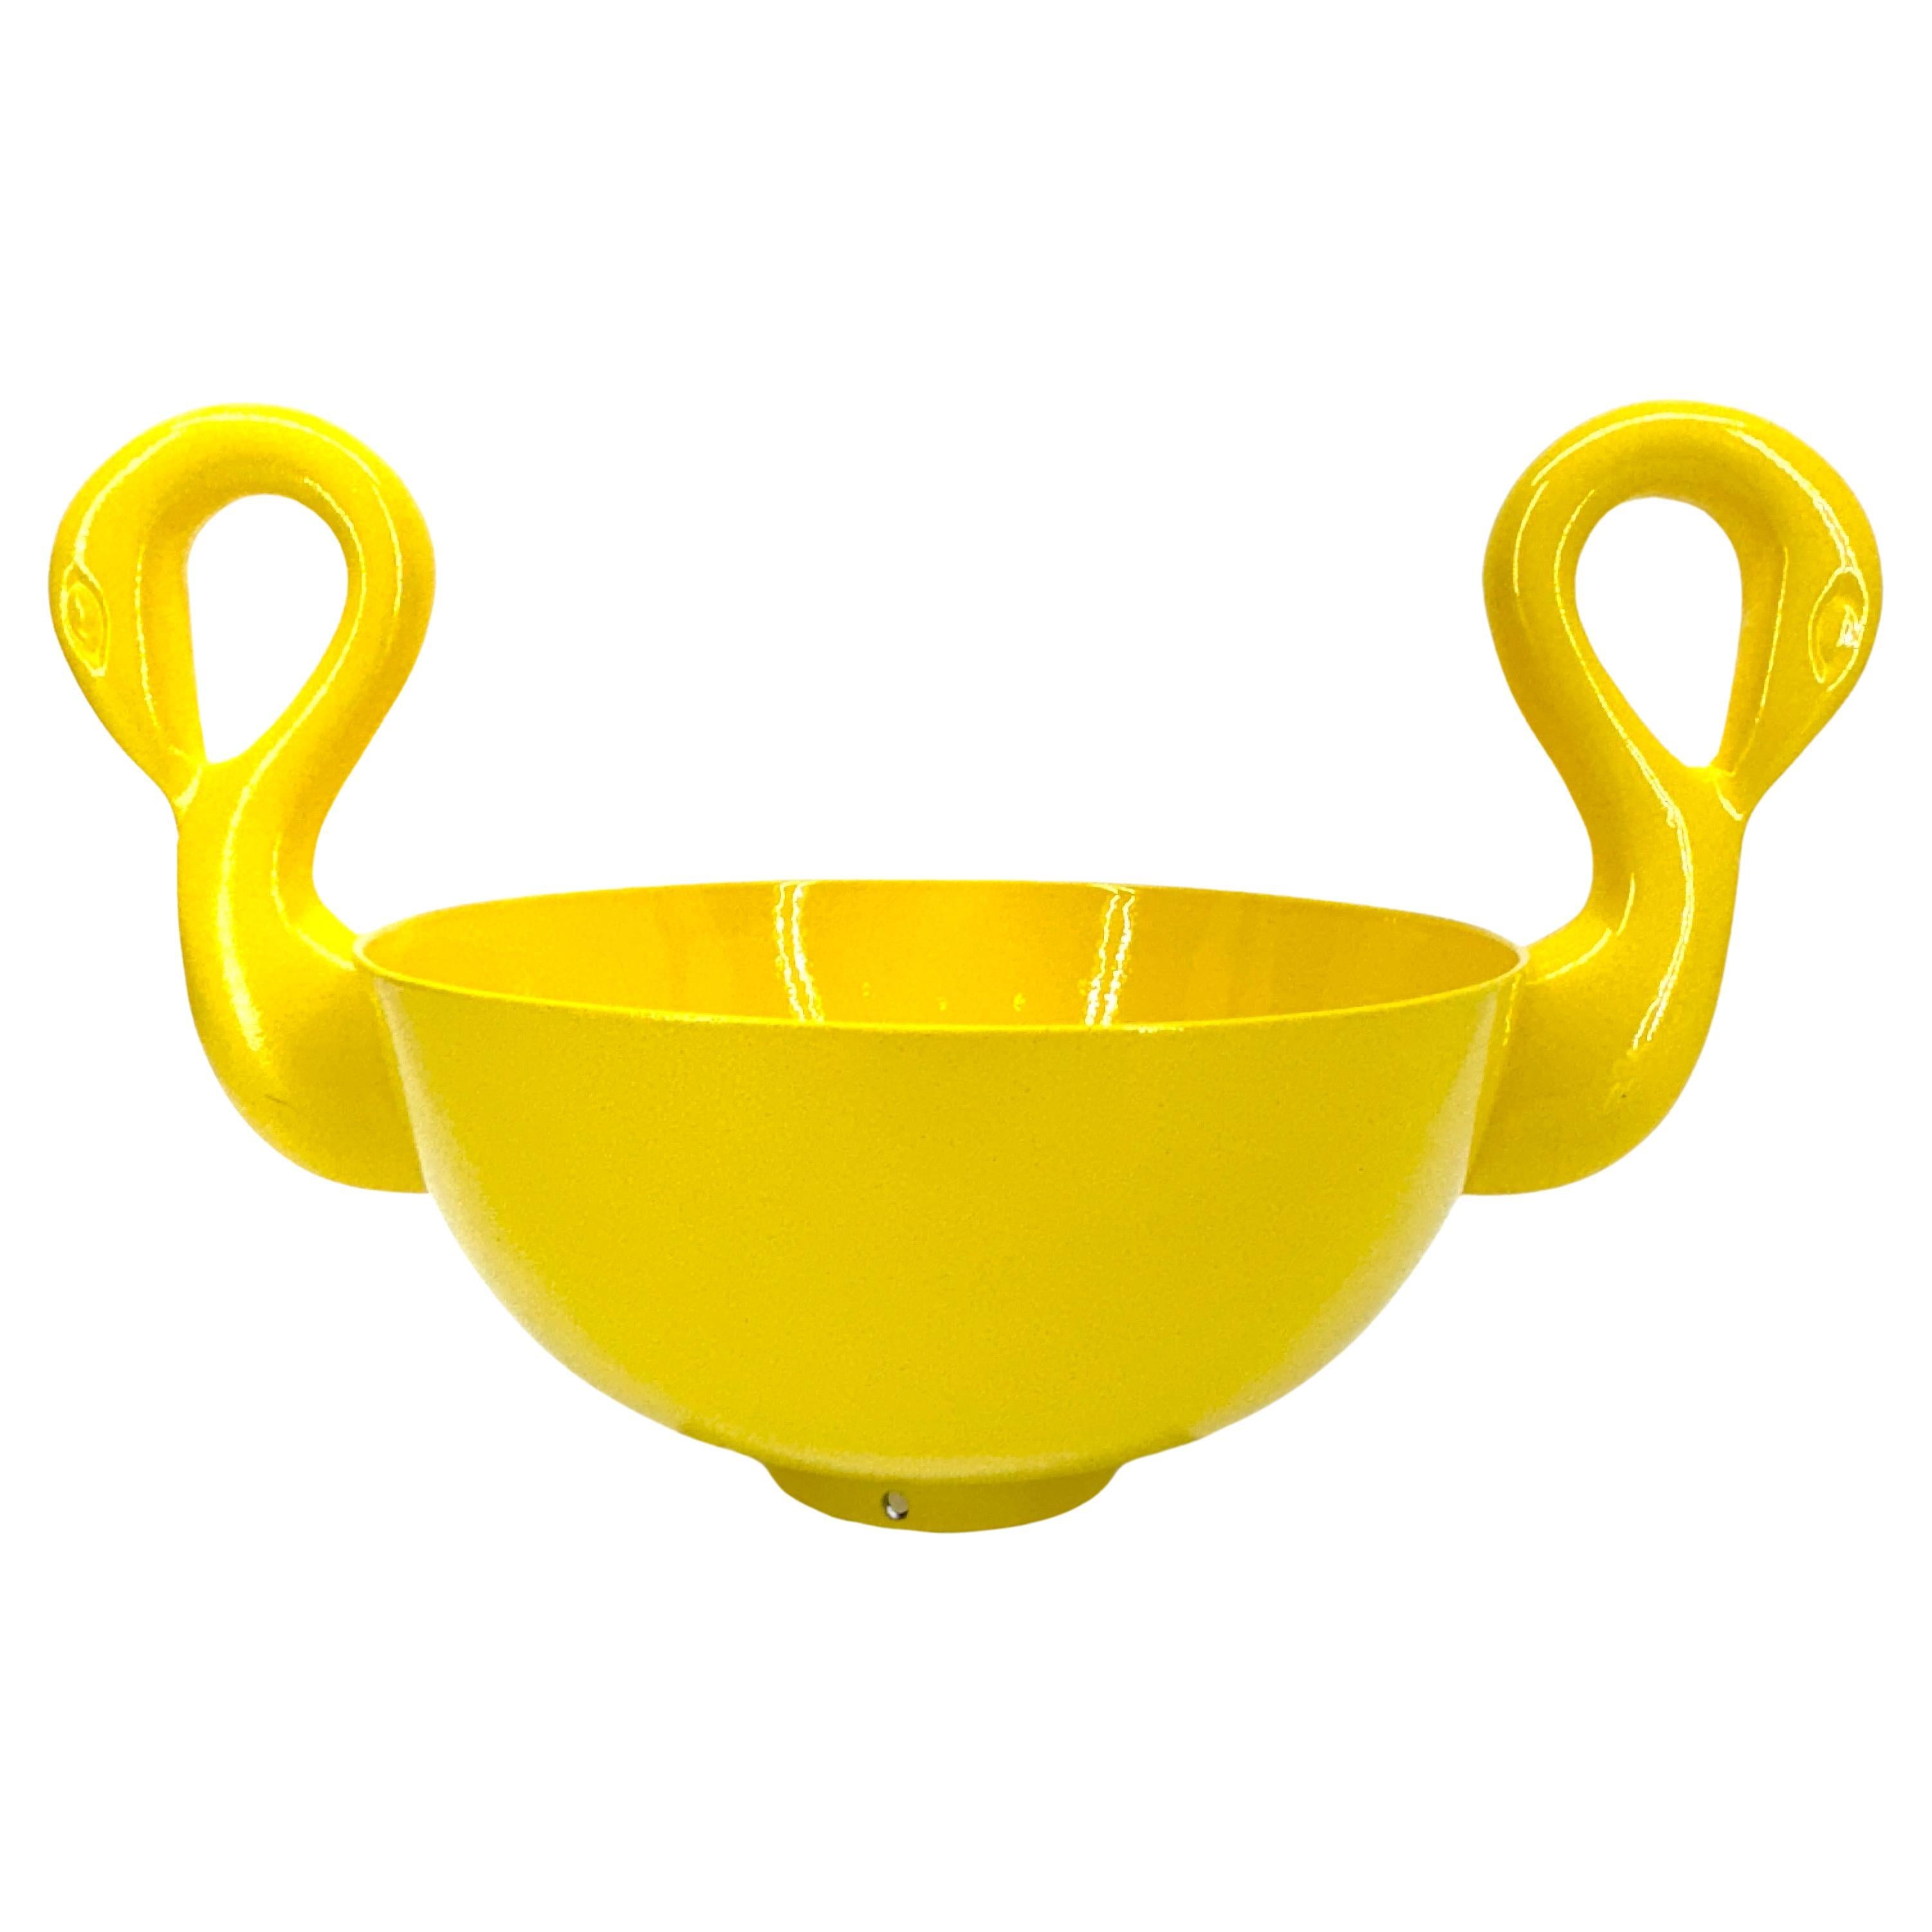 This is a unique English decorative bowl, functional as well as fun. There are many uses for this versatile freshly powder-coated bright sunshine yellow piece. This bowl features two swans that certainly would be a perfect statement piece on a side